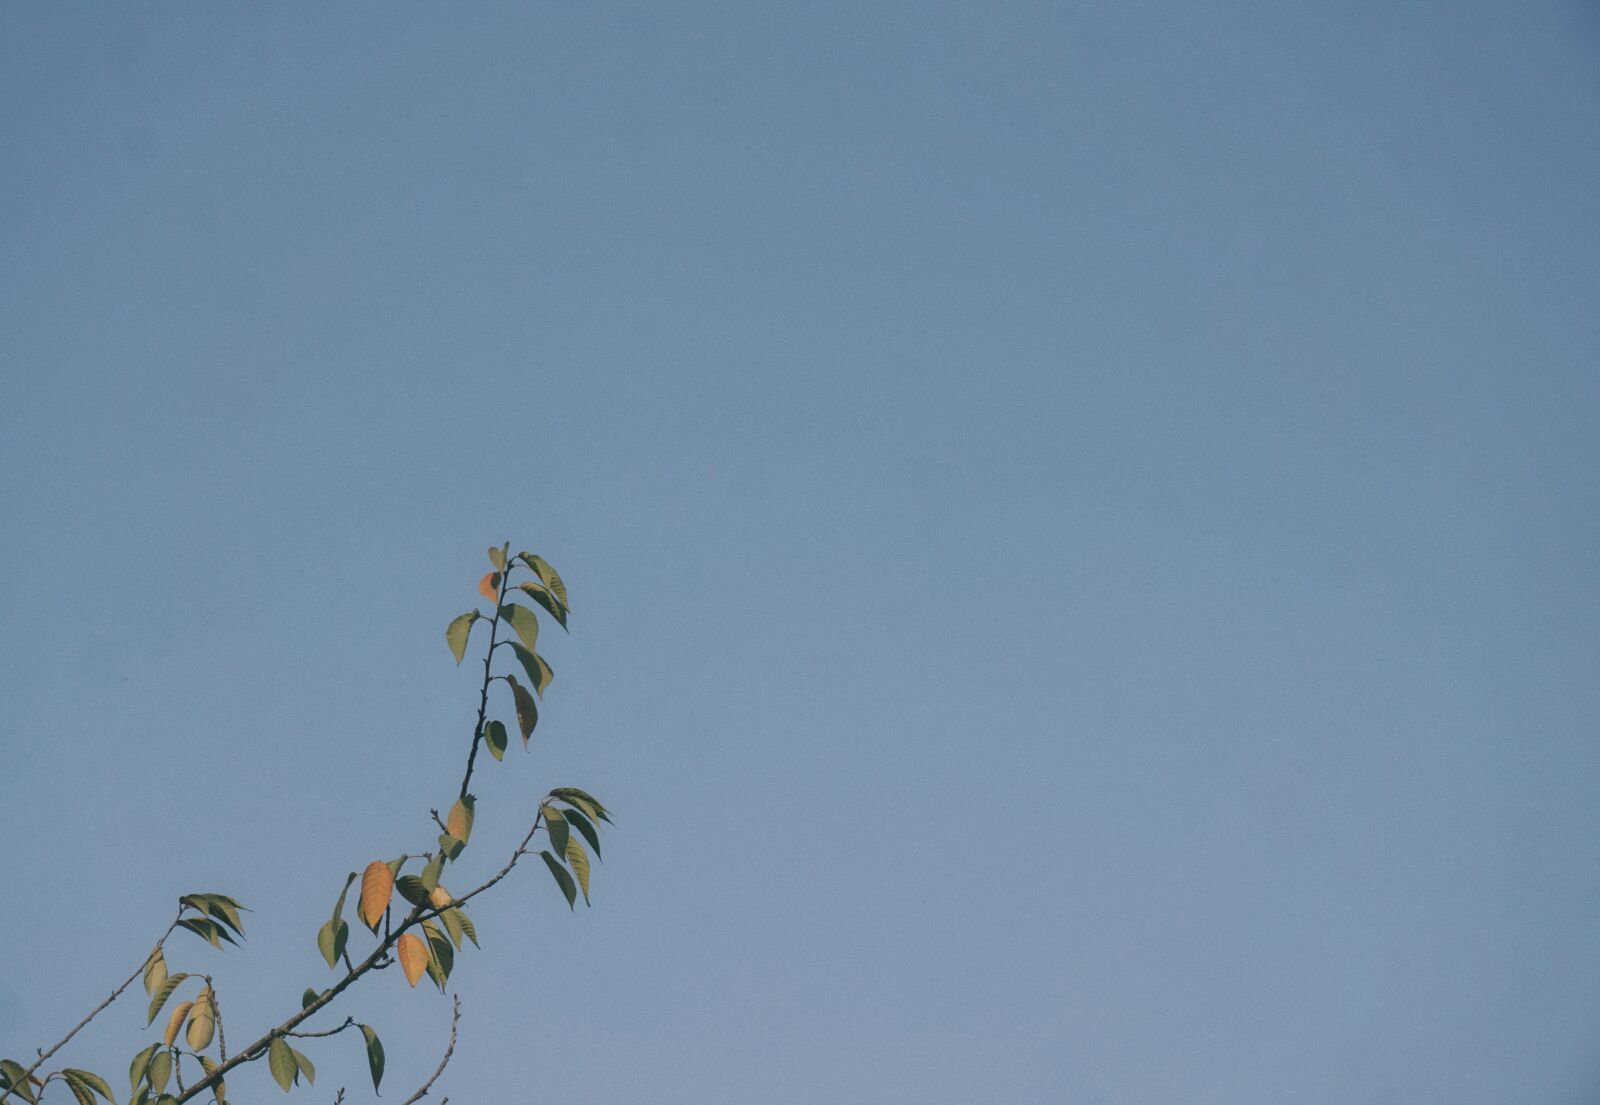 Sony a6000 sample photo. Sky, blue, the leaves photography